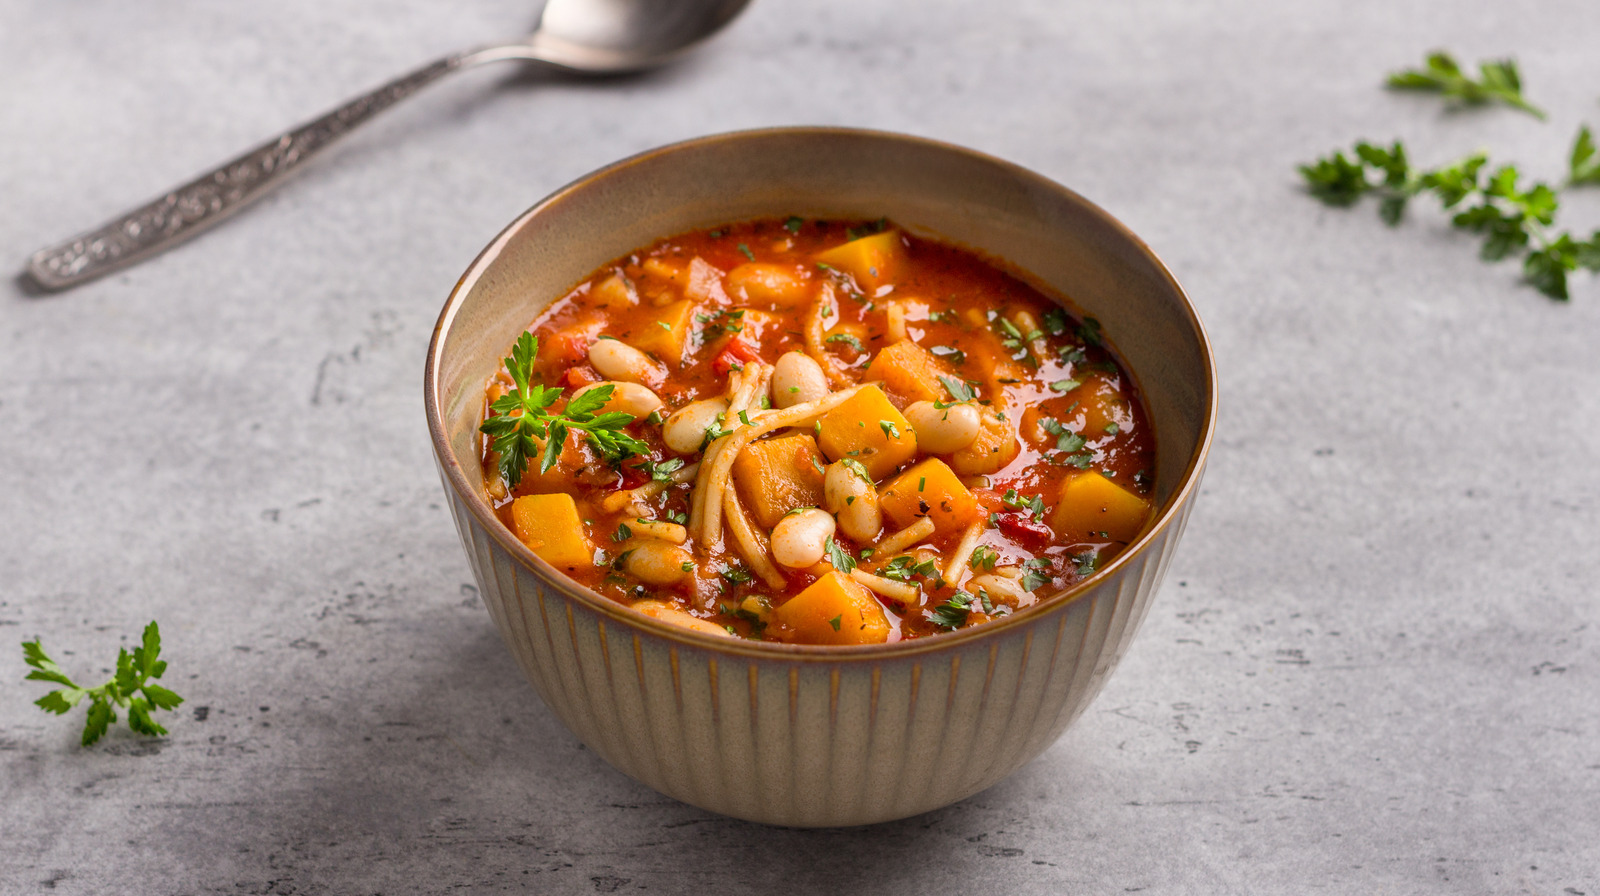 11 tips you need to make the best homemade minestrone soup